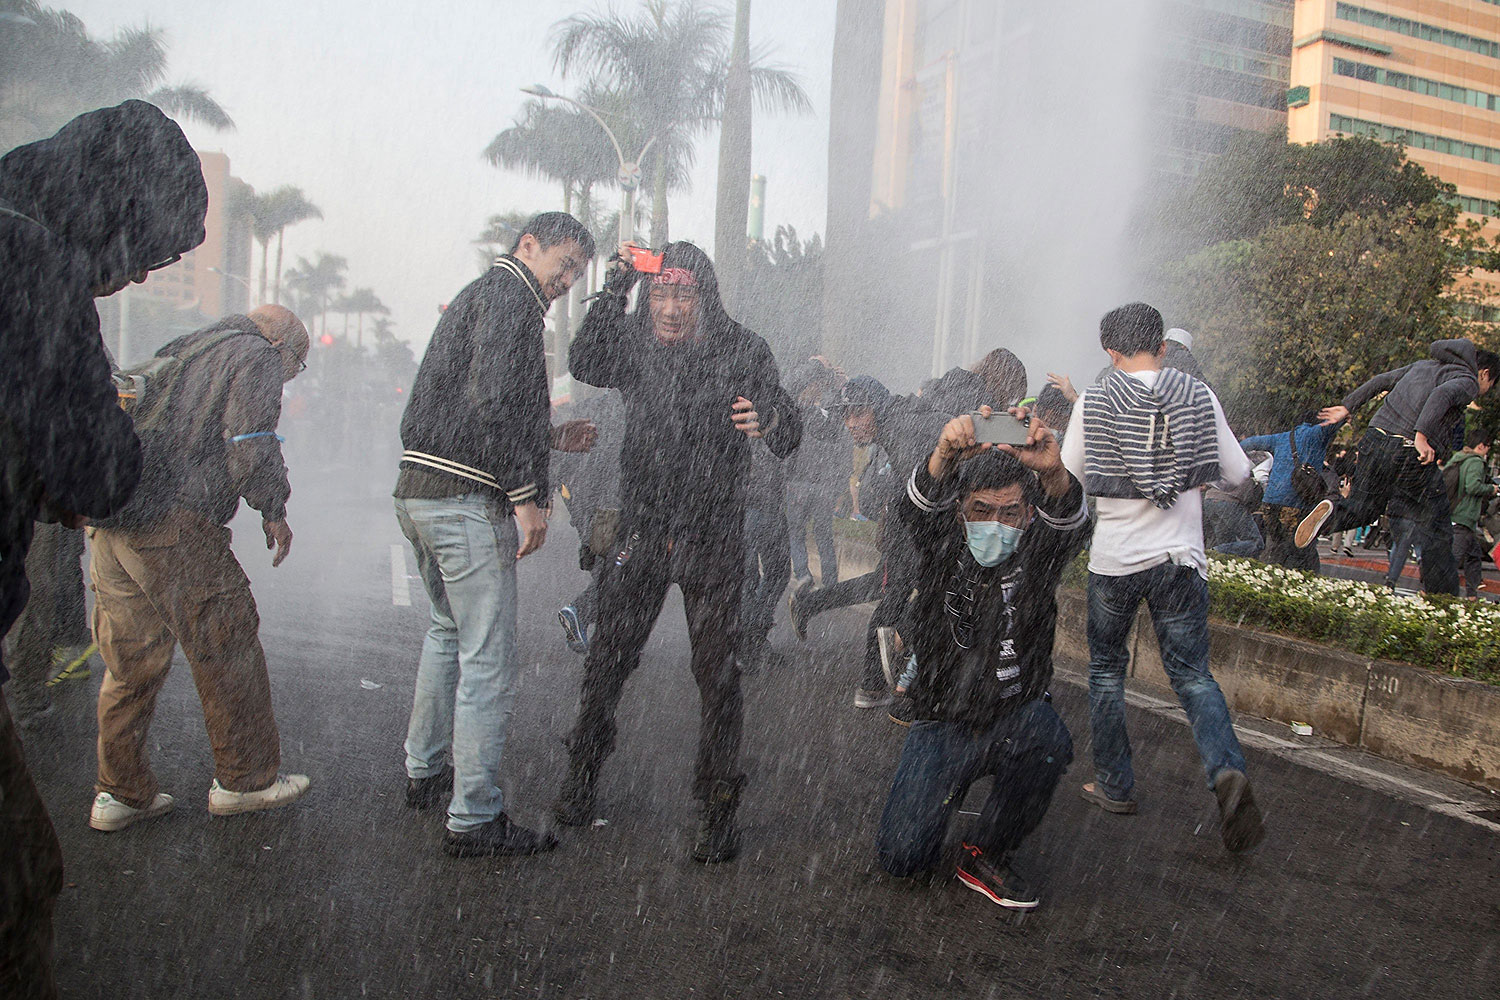 Riot police use water cannons during a clash with student protesters outside the Executive Yuan, a branch of government in charge of administrative affairs for all of Taiwan on March 24, 2014 in Taipei, Taiwan.